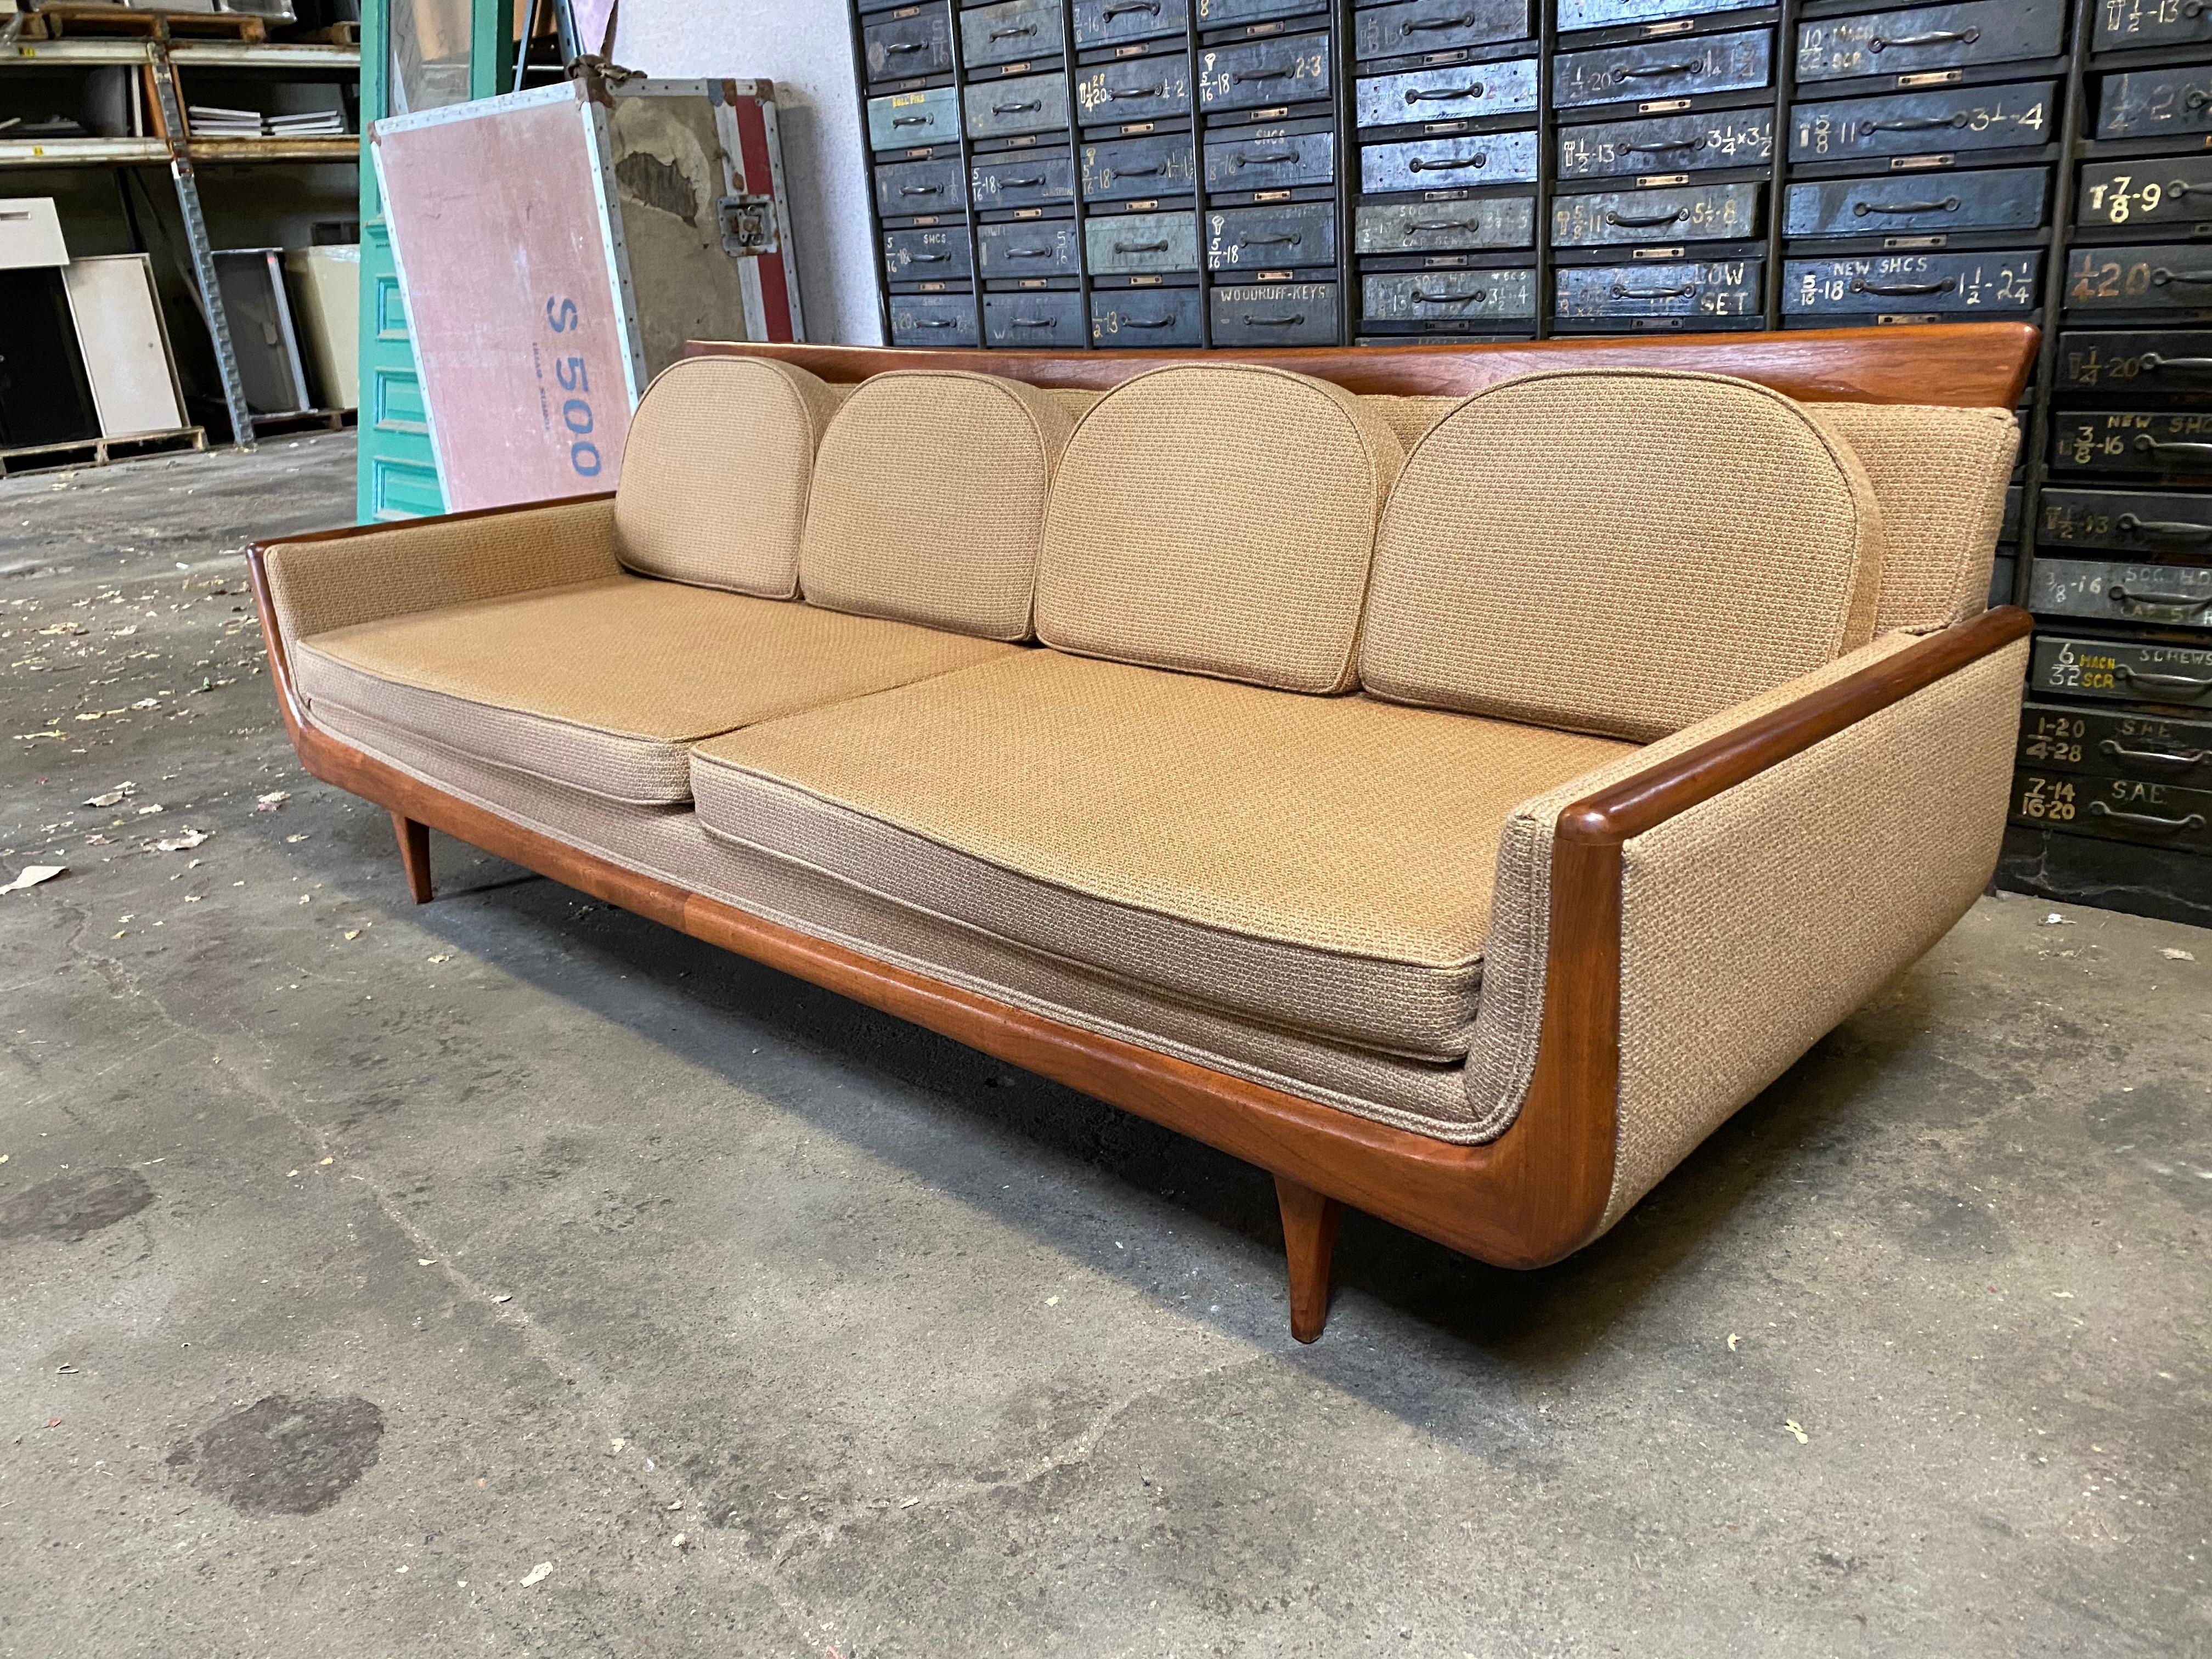 Upholstery Handsome Mid-Century Modern Sofa, Manner of Adrian Pearsall